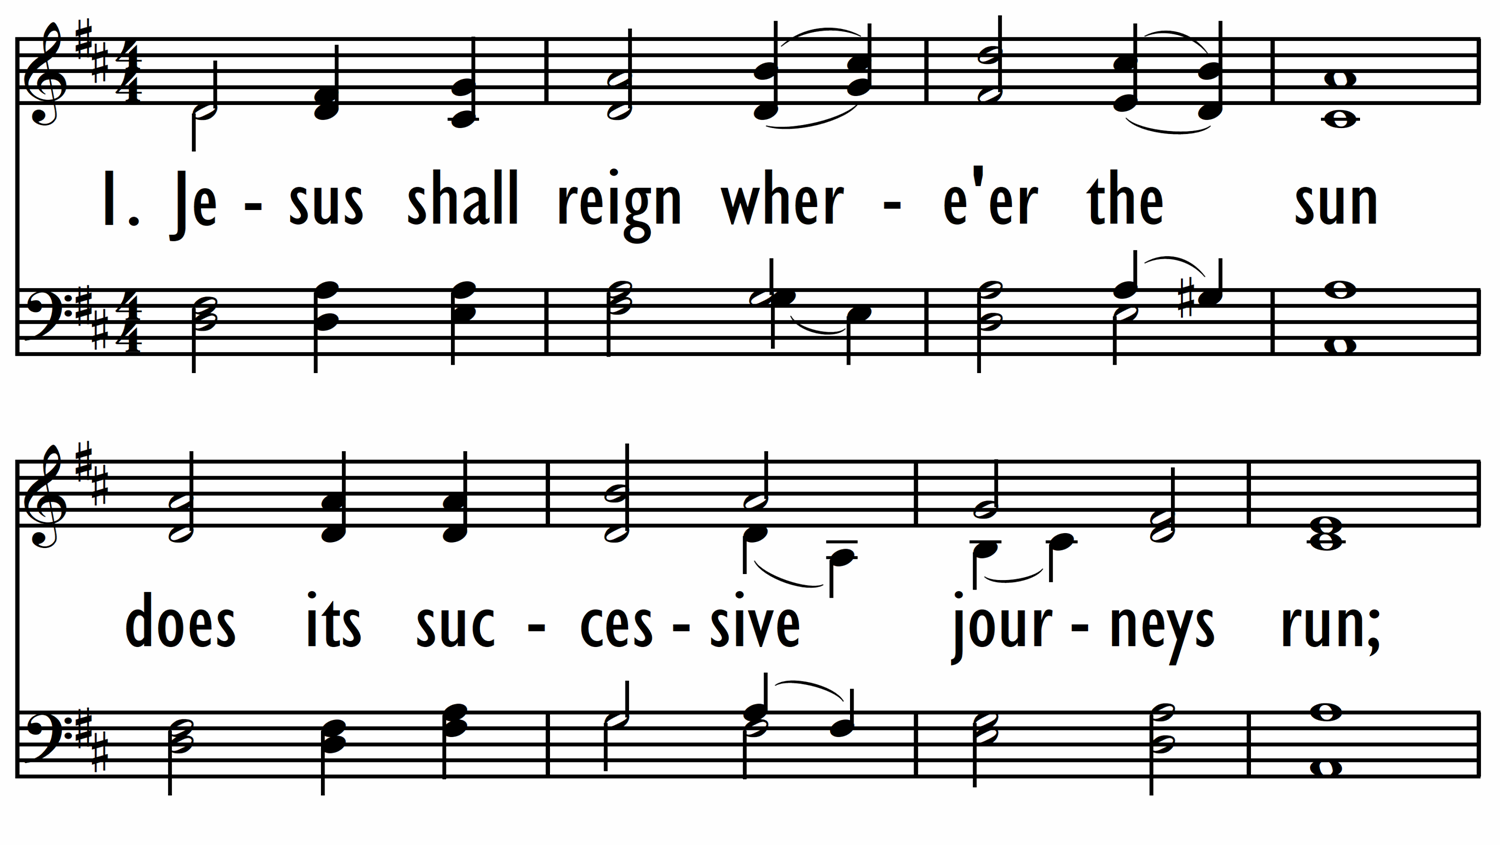 JESUS SHALL REIGN WHERE'ER THE SUN - with descant-ppt